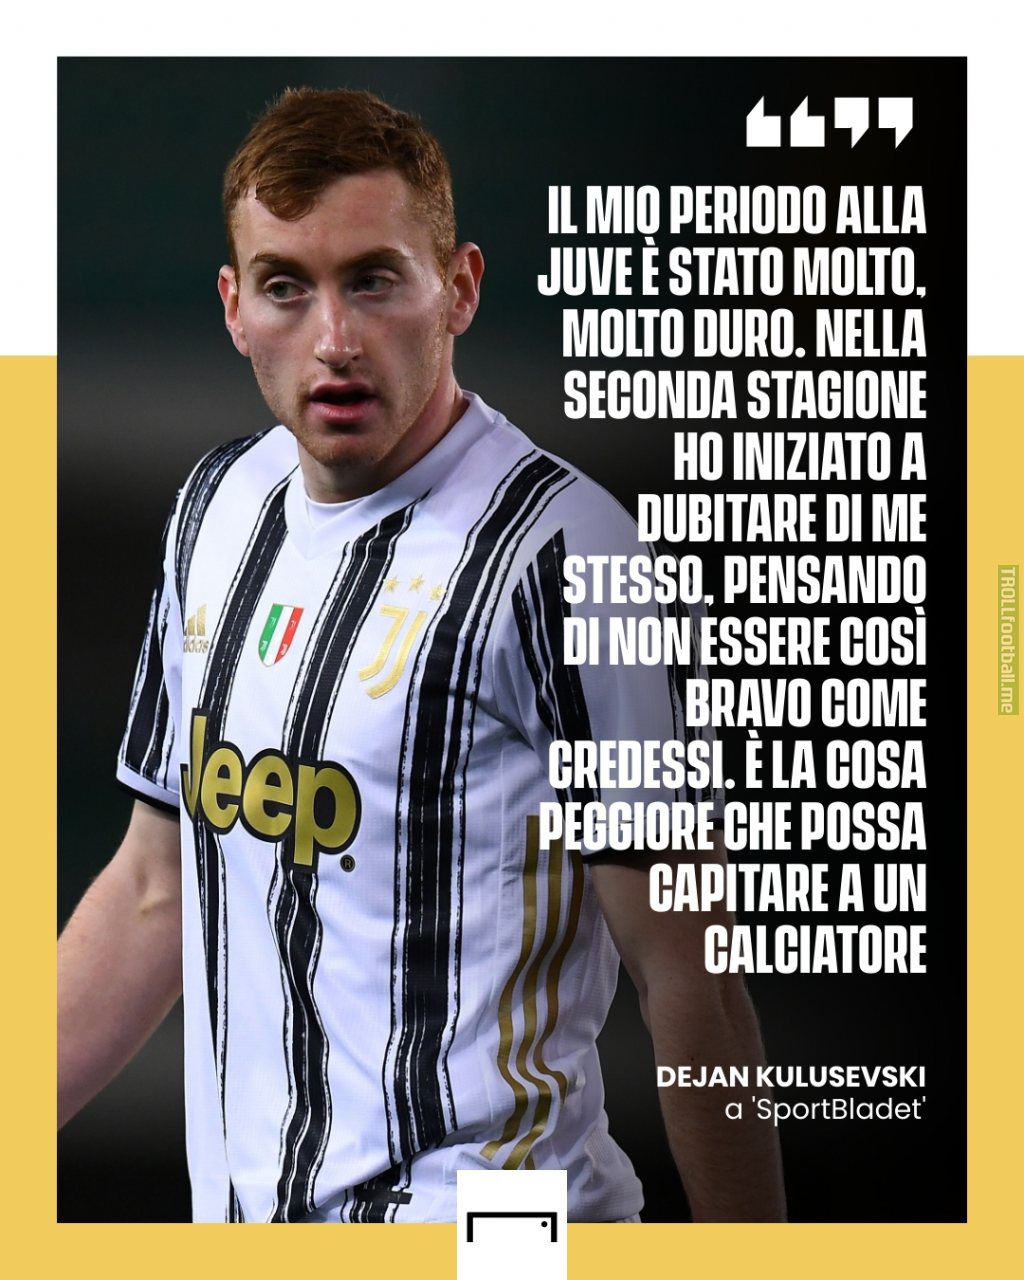 [GOAL Italia] Kulusevski: "In my second season at Juventus I doubted myself, I thought I wasn't as good as I thought"